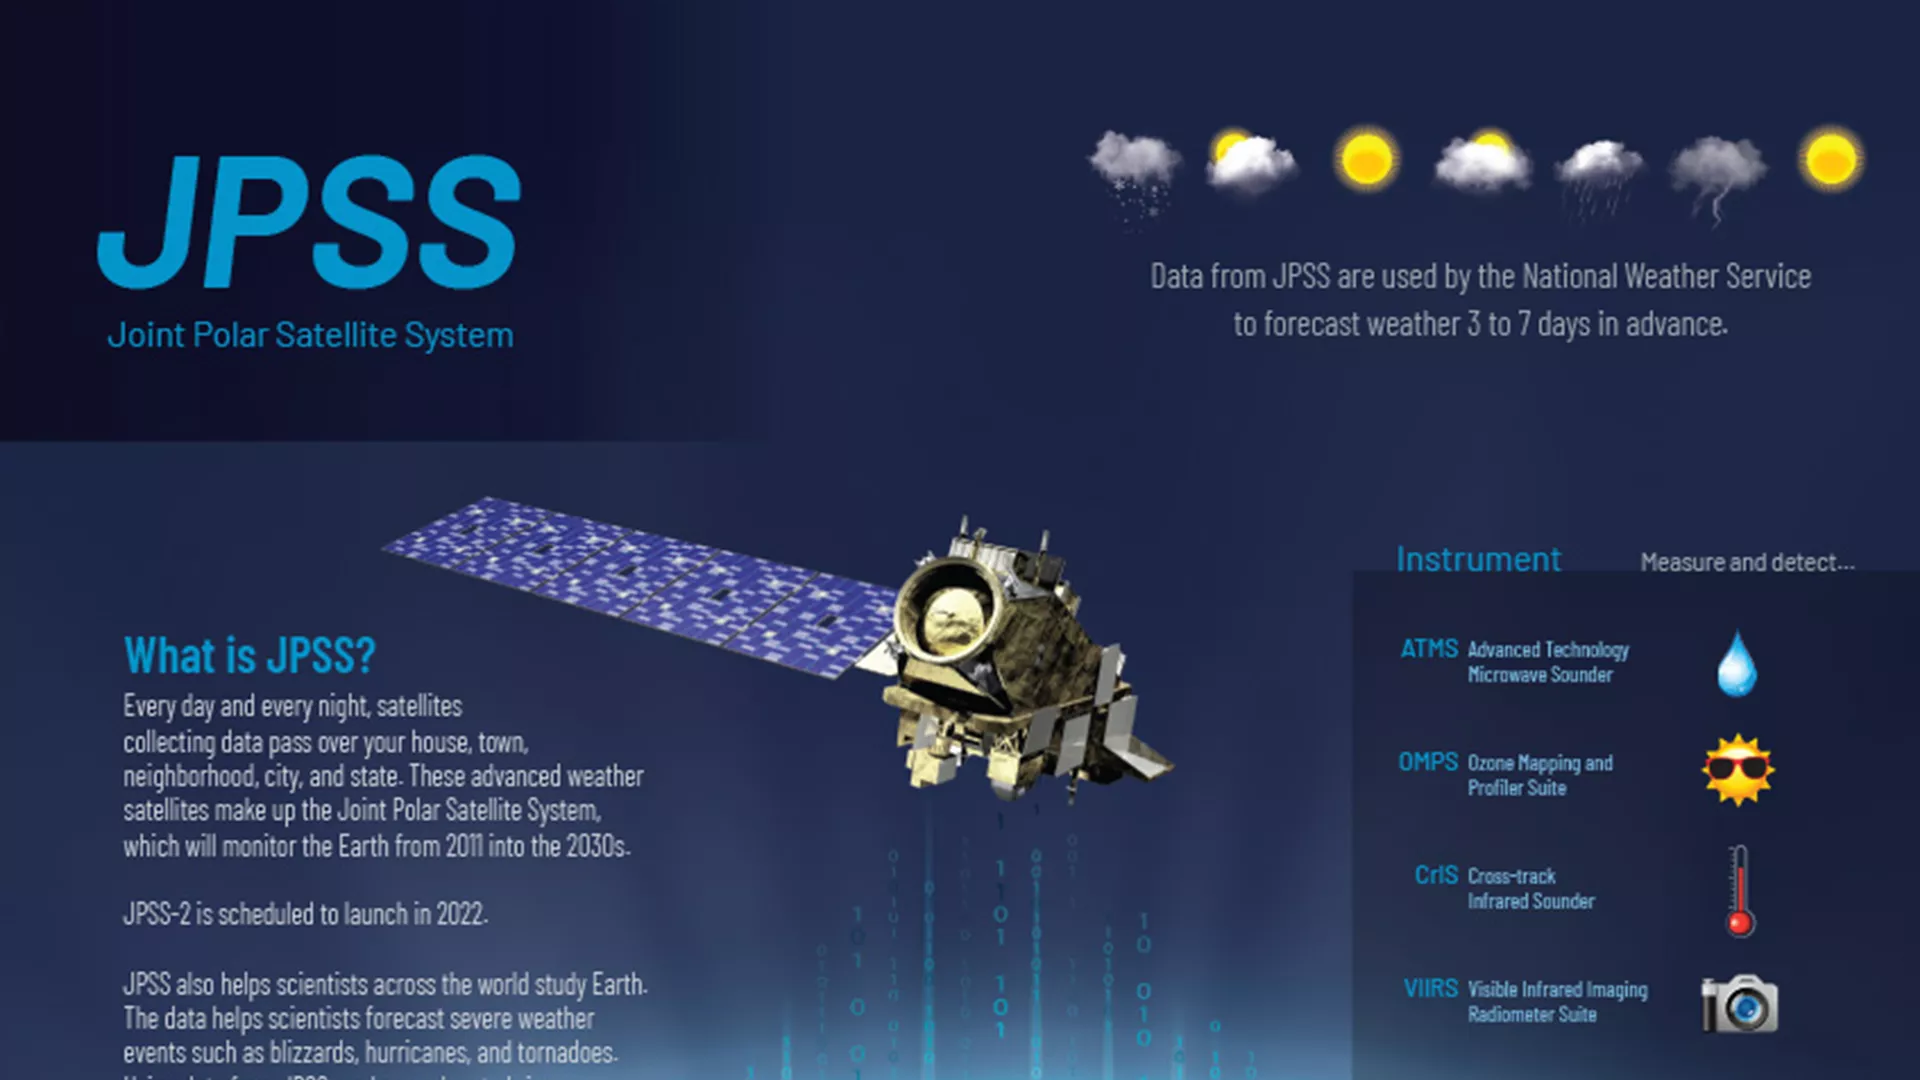 Image and diagram of the JPSS Satellite